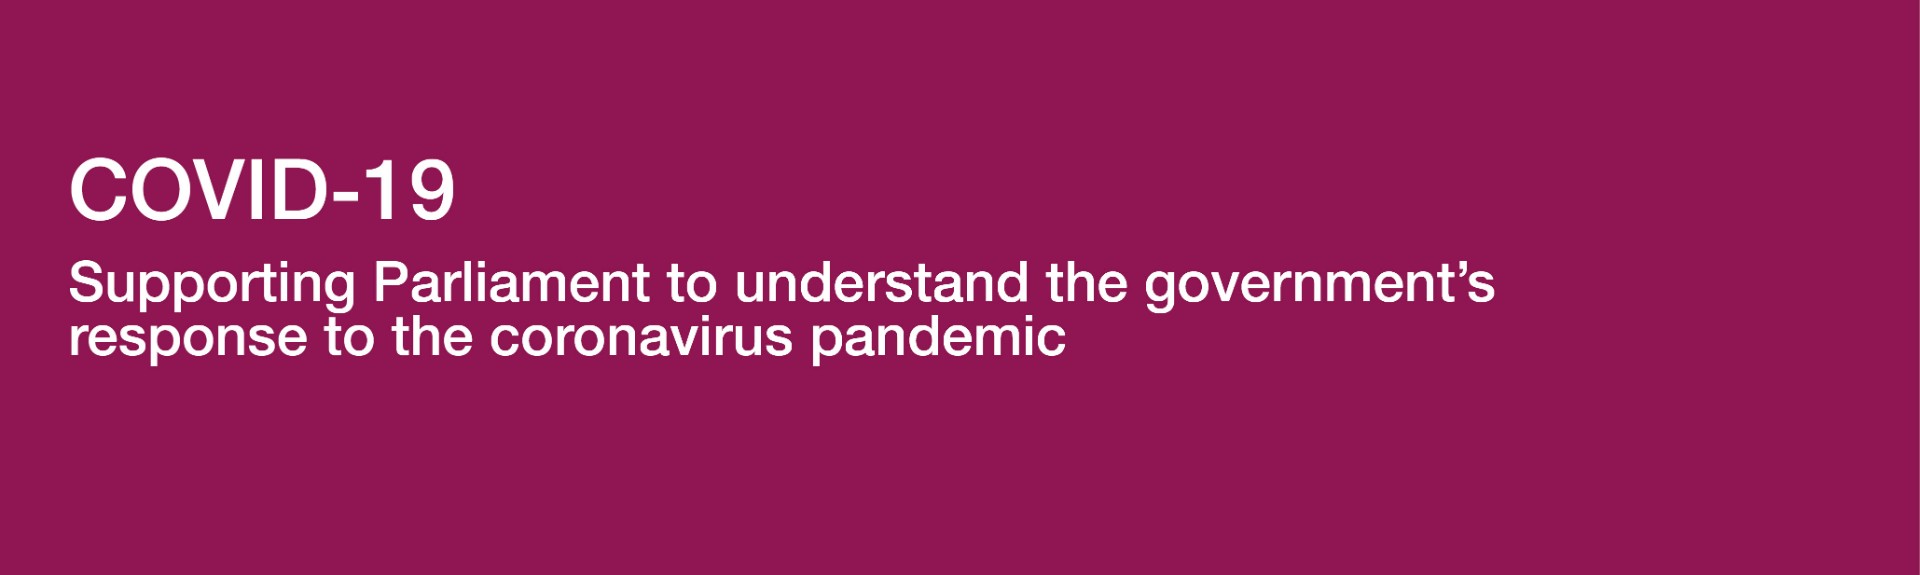 COVID-19: Supporting Parliament to understand the government's response to the coronavirus pandemic